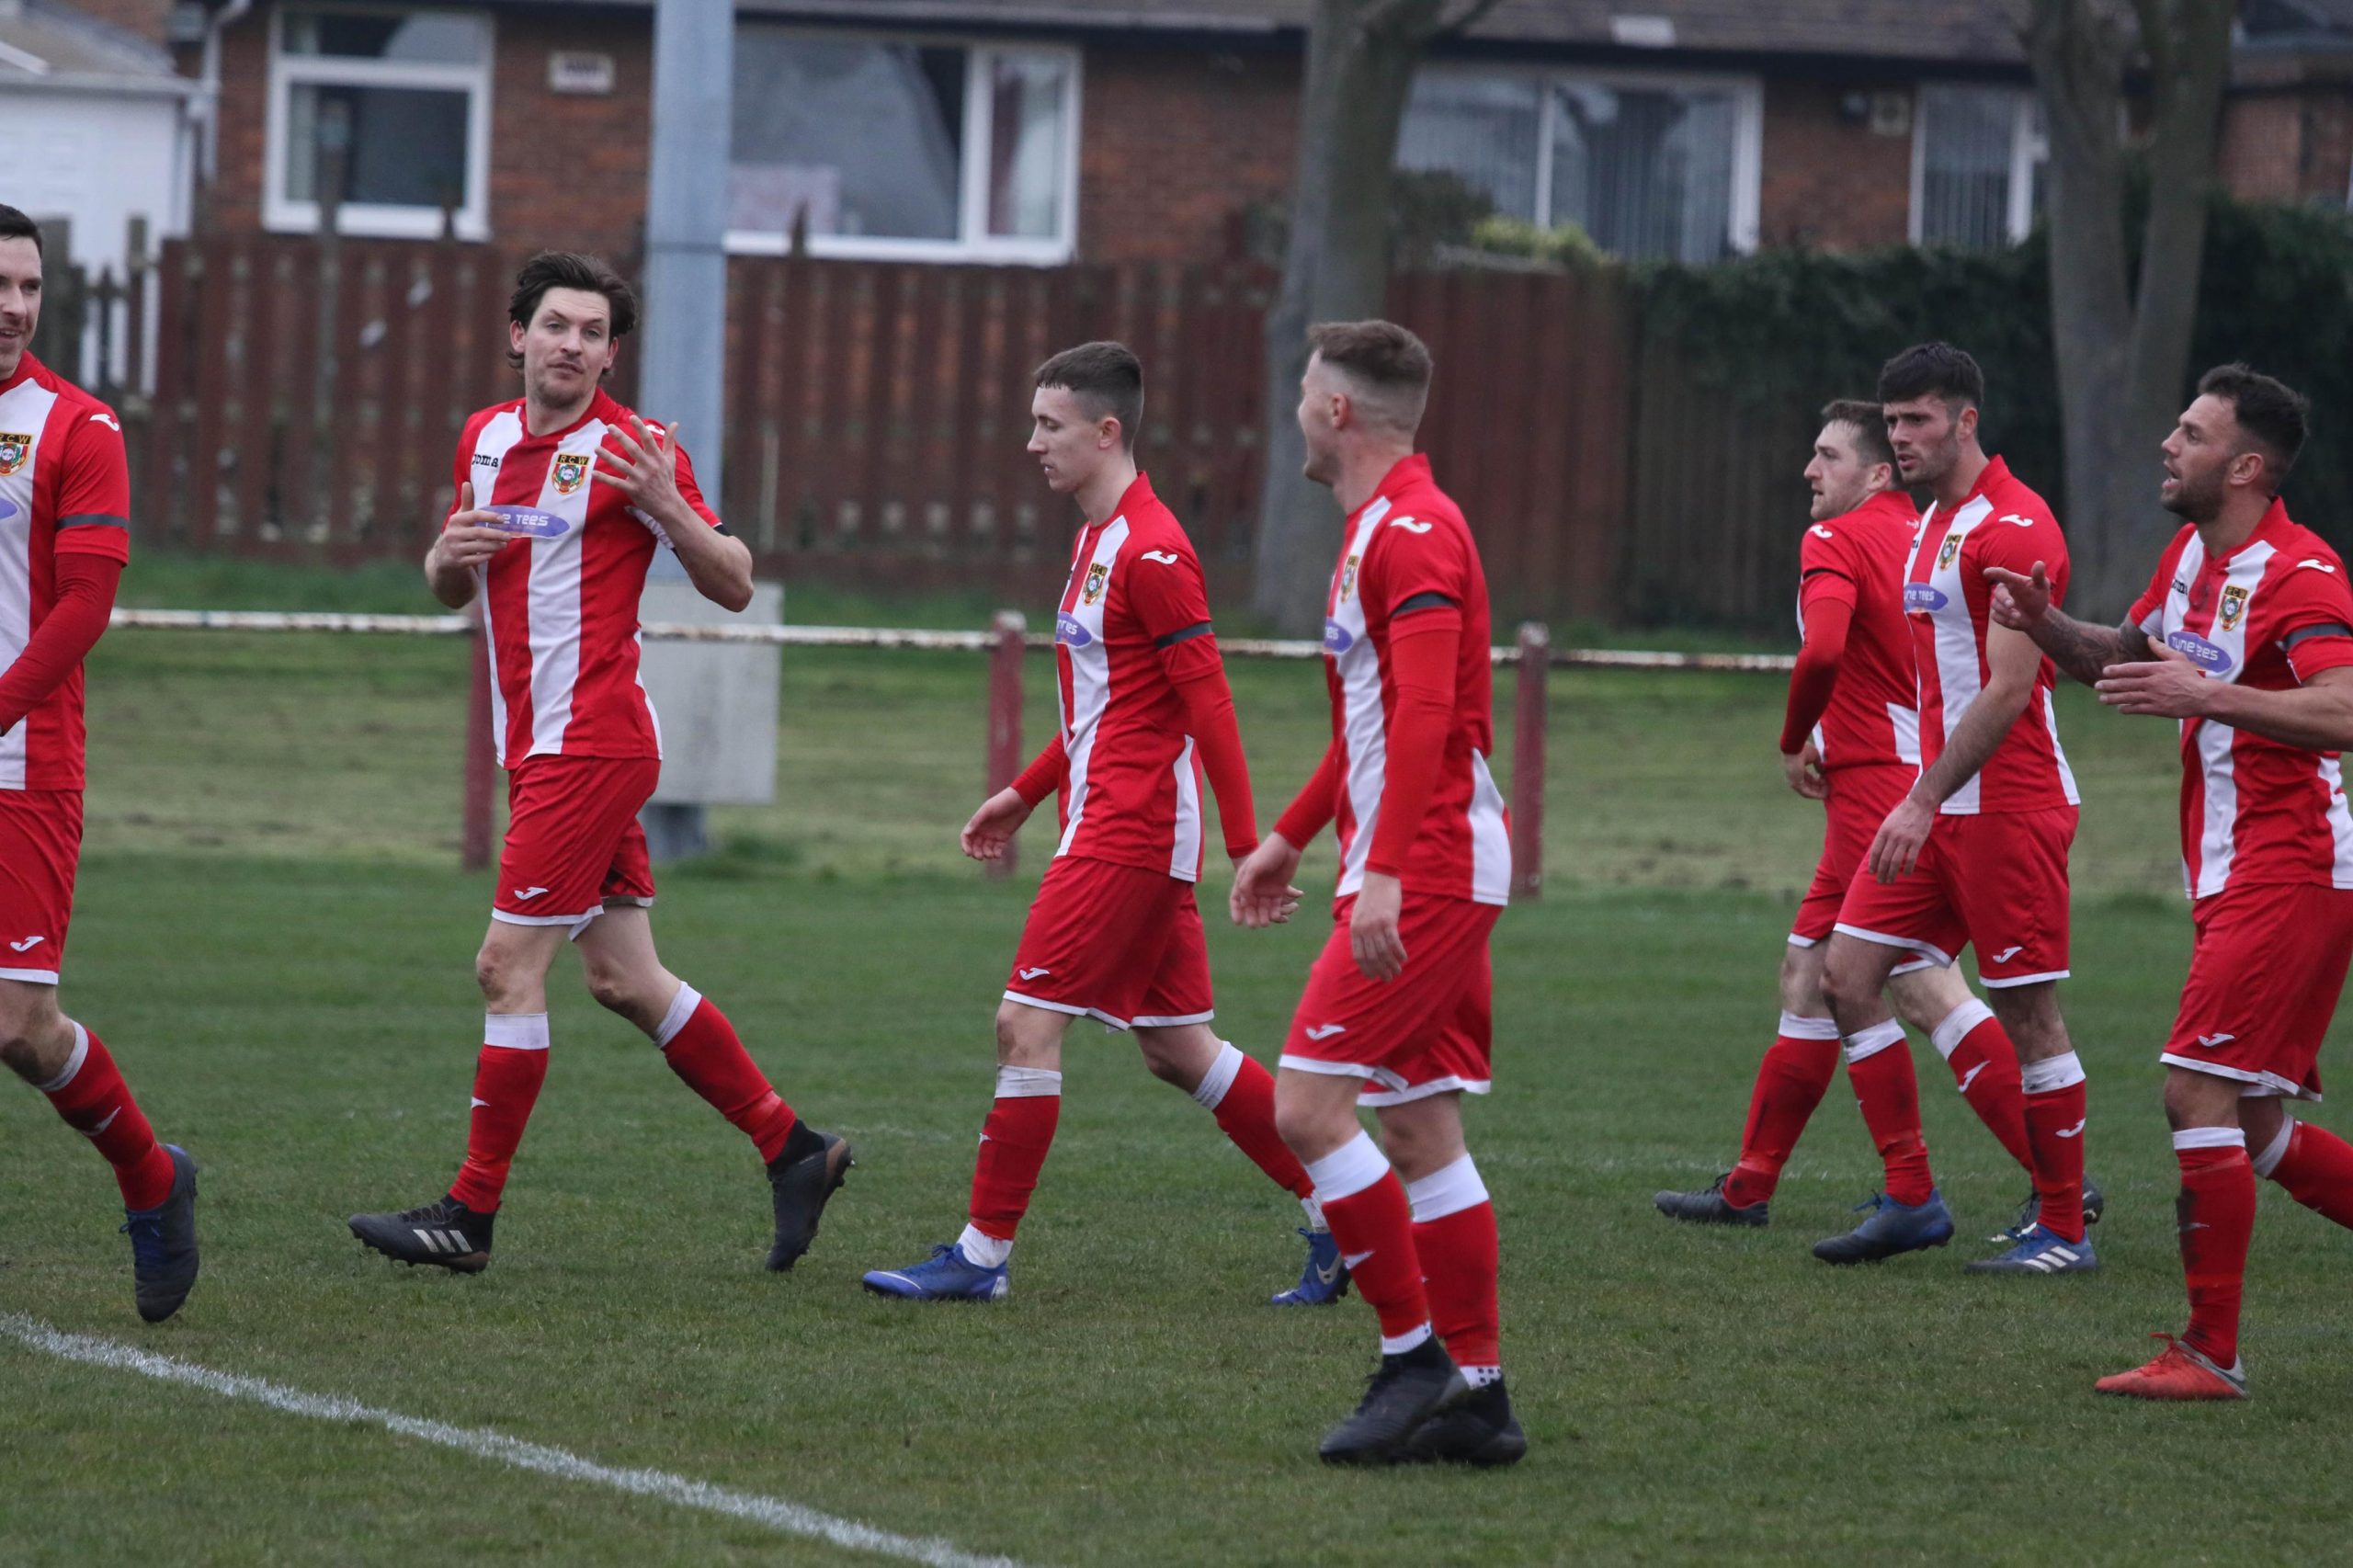 Ryhope CW 3-2 Seaham Red Star: James Ellis scores a stunning goal stealing the final match of the season